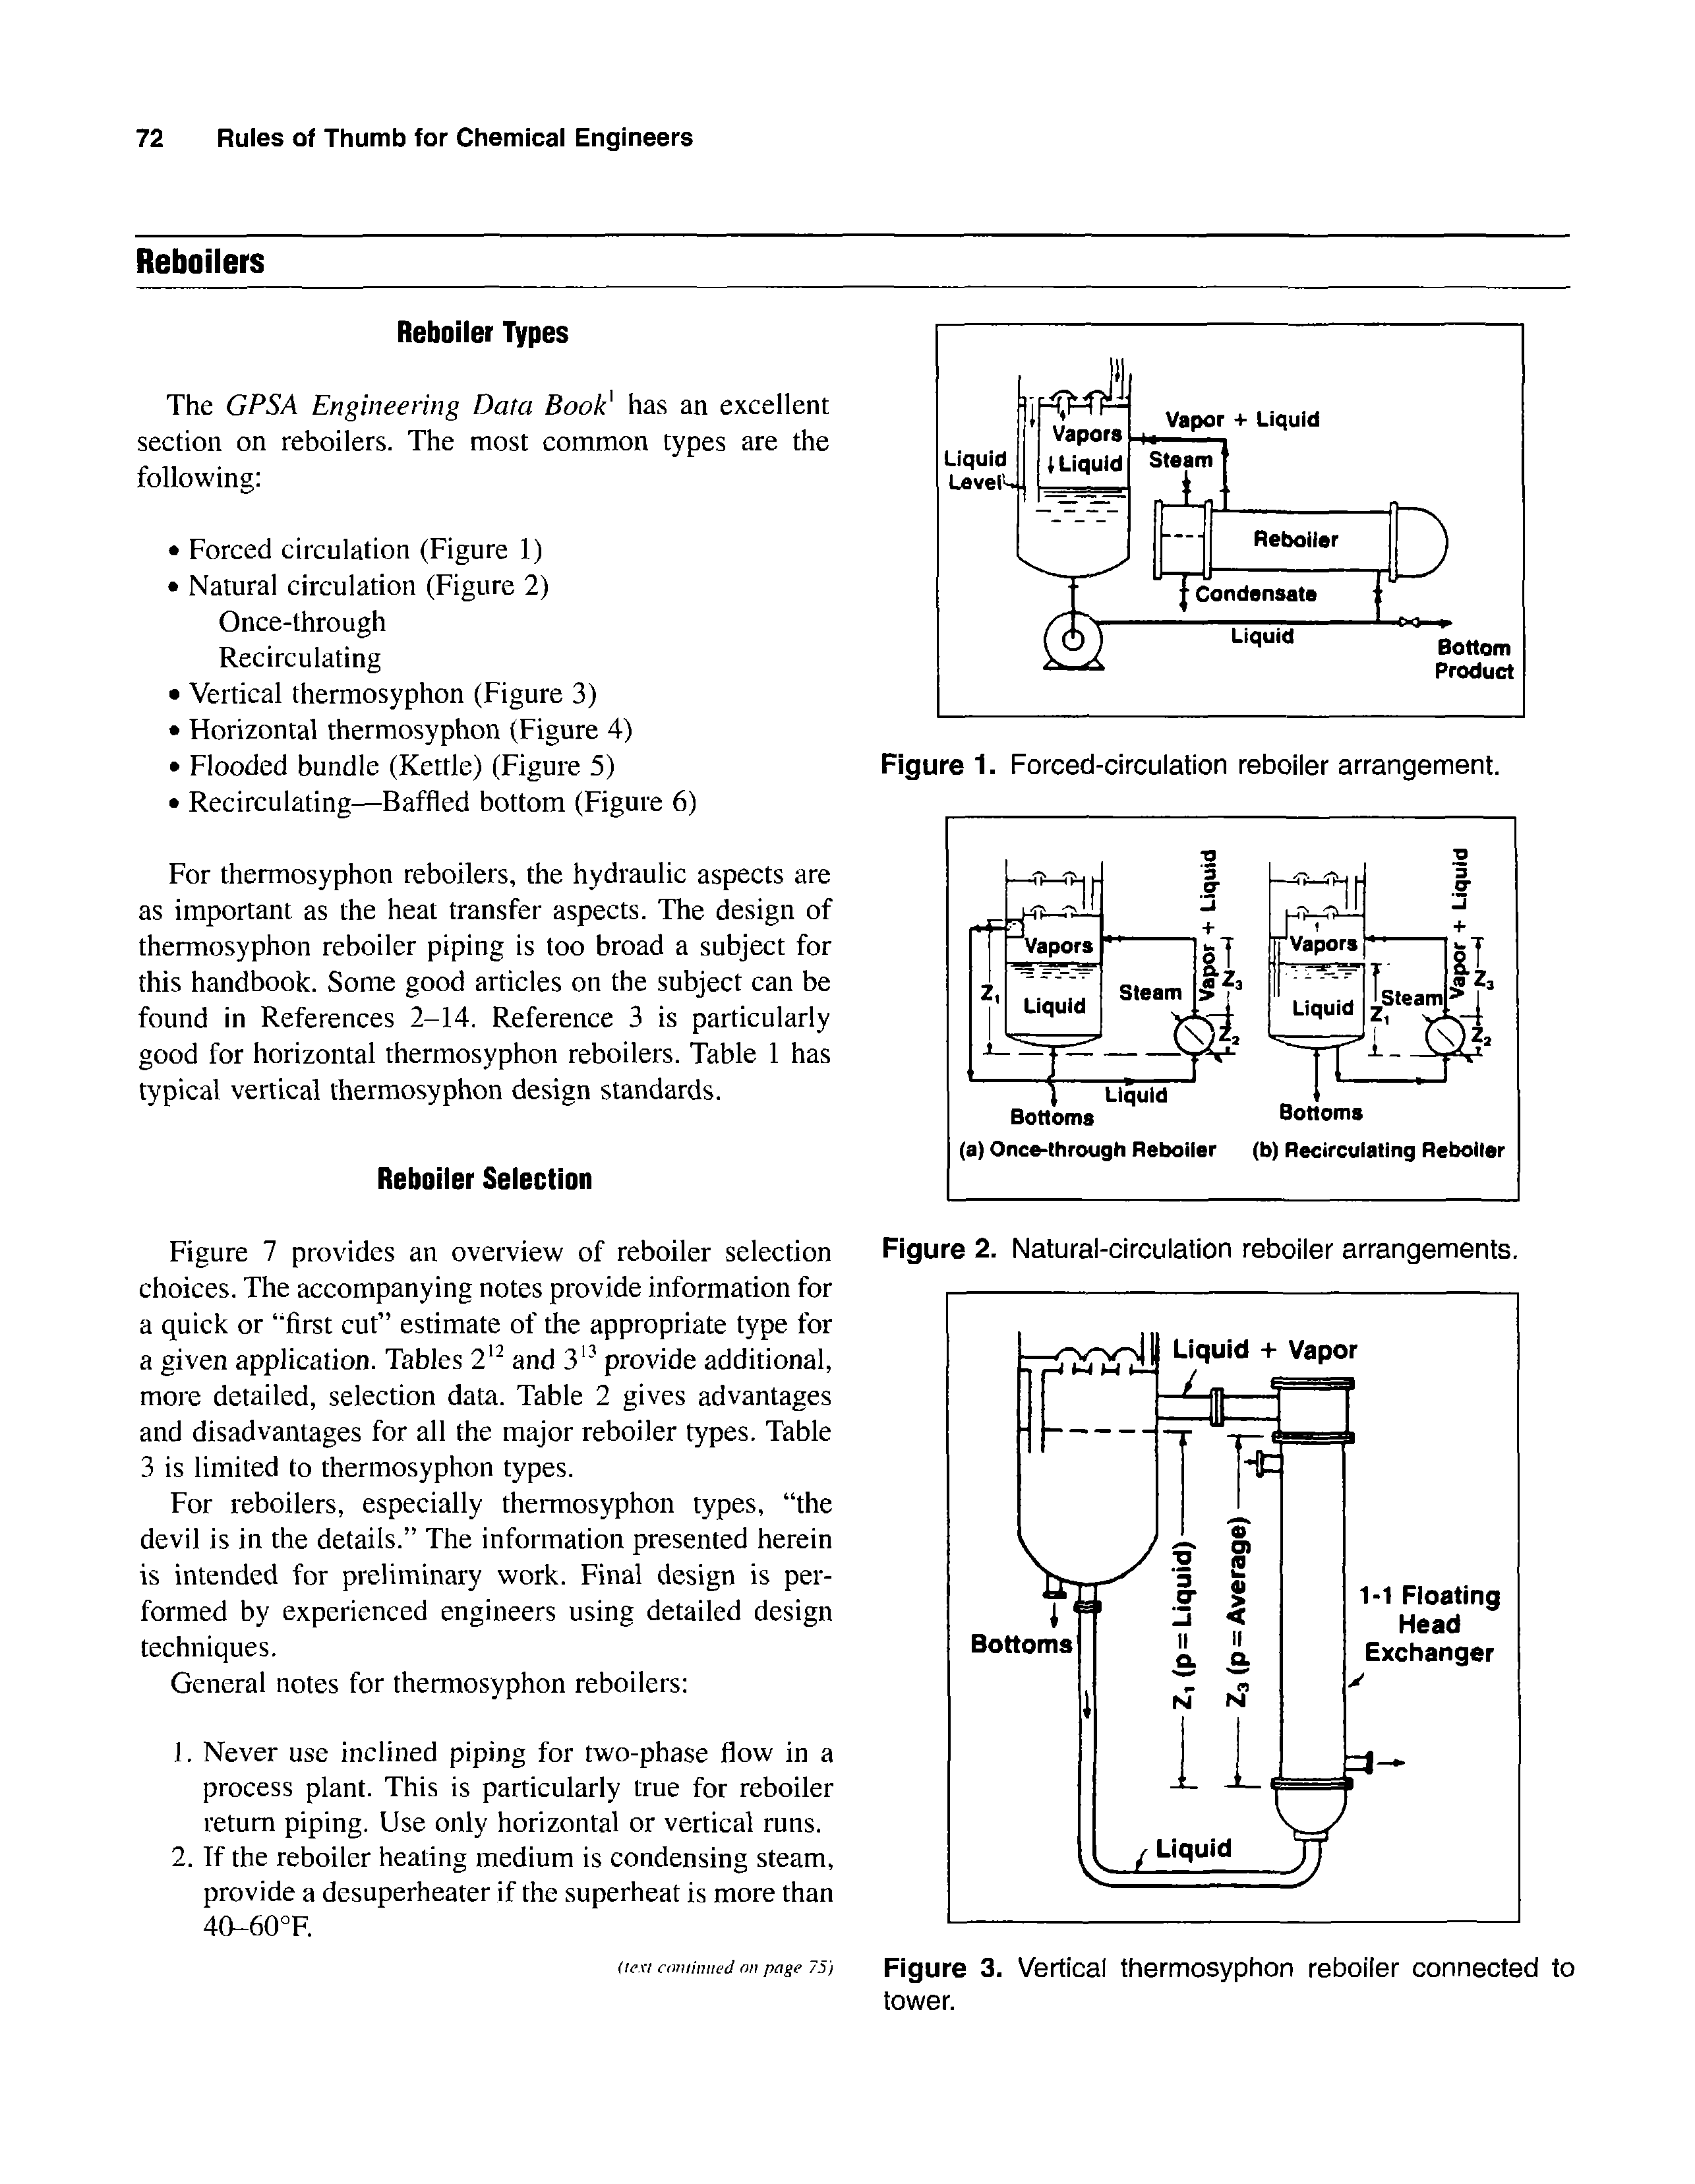 Figure 3. Vertical thermosyphon reboiler connected to tower.